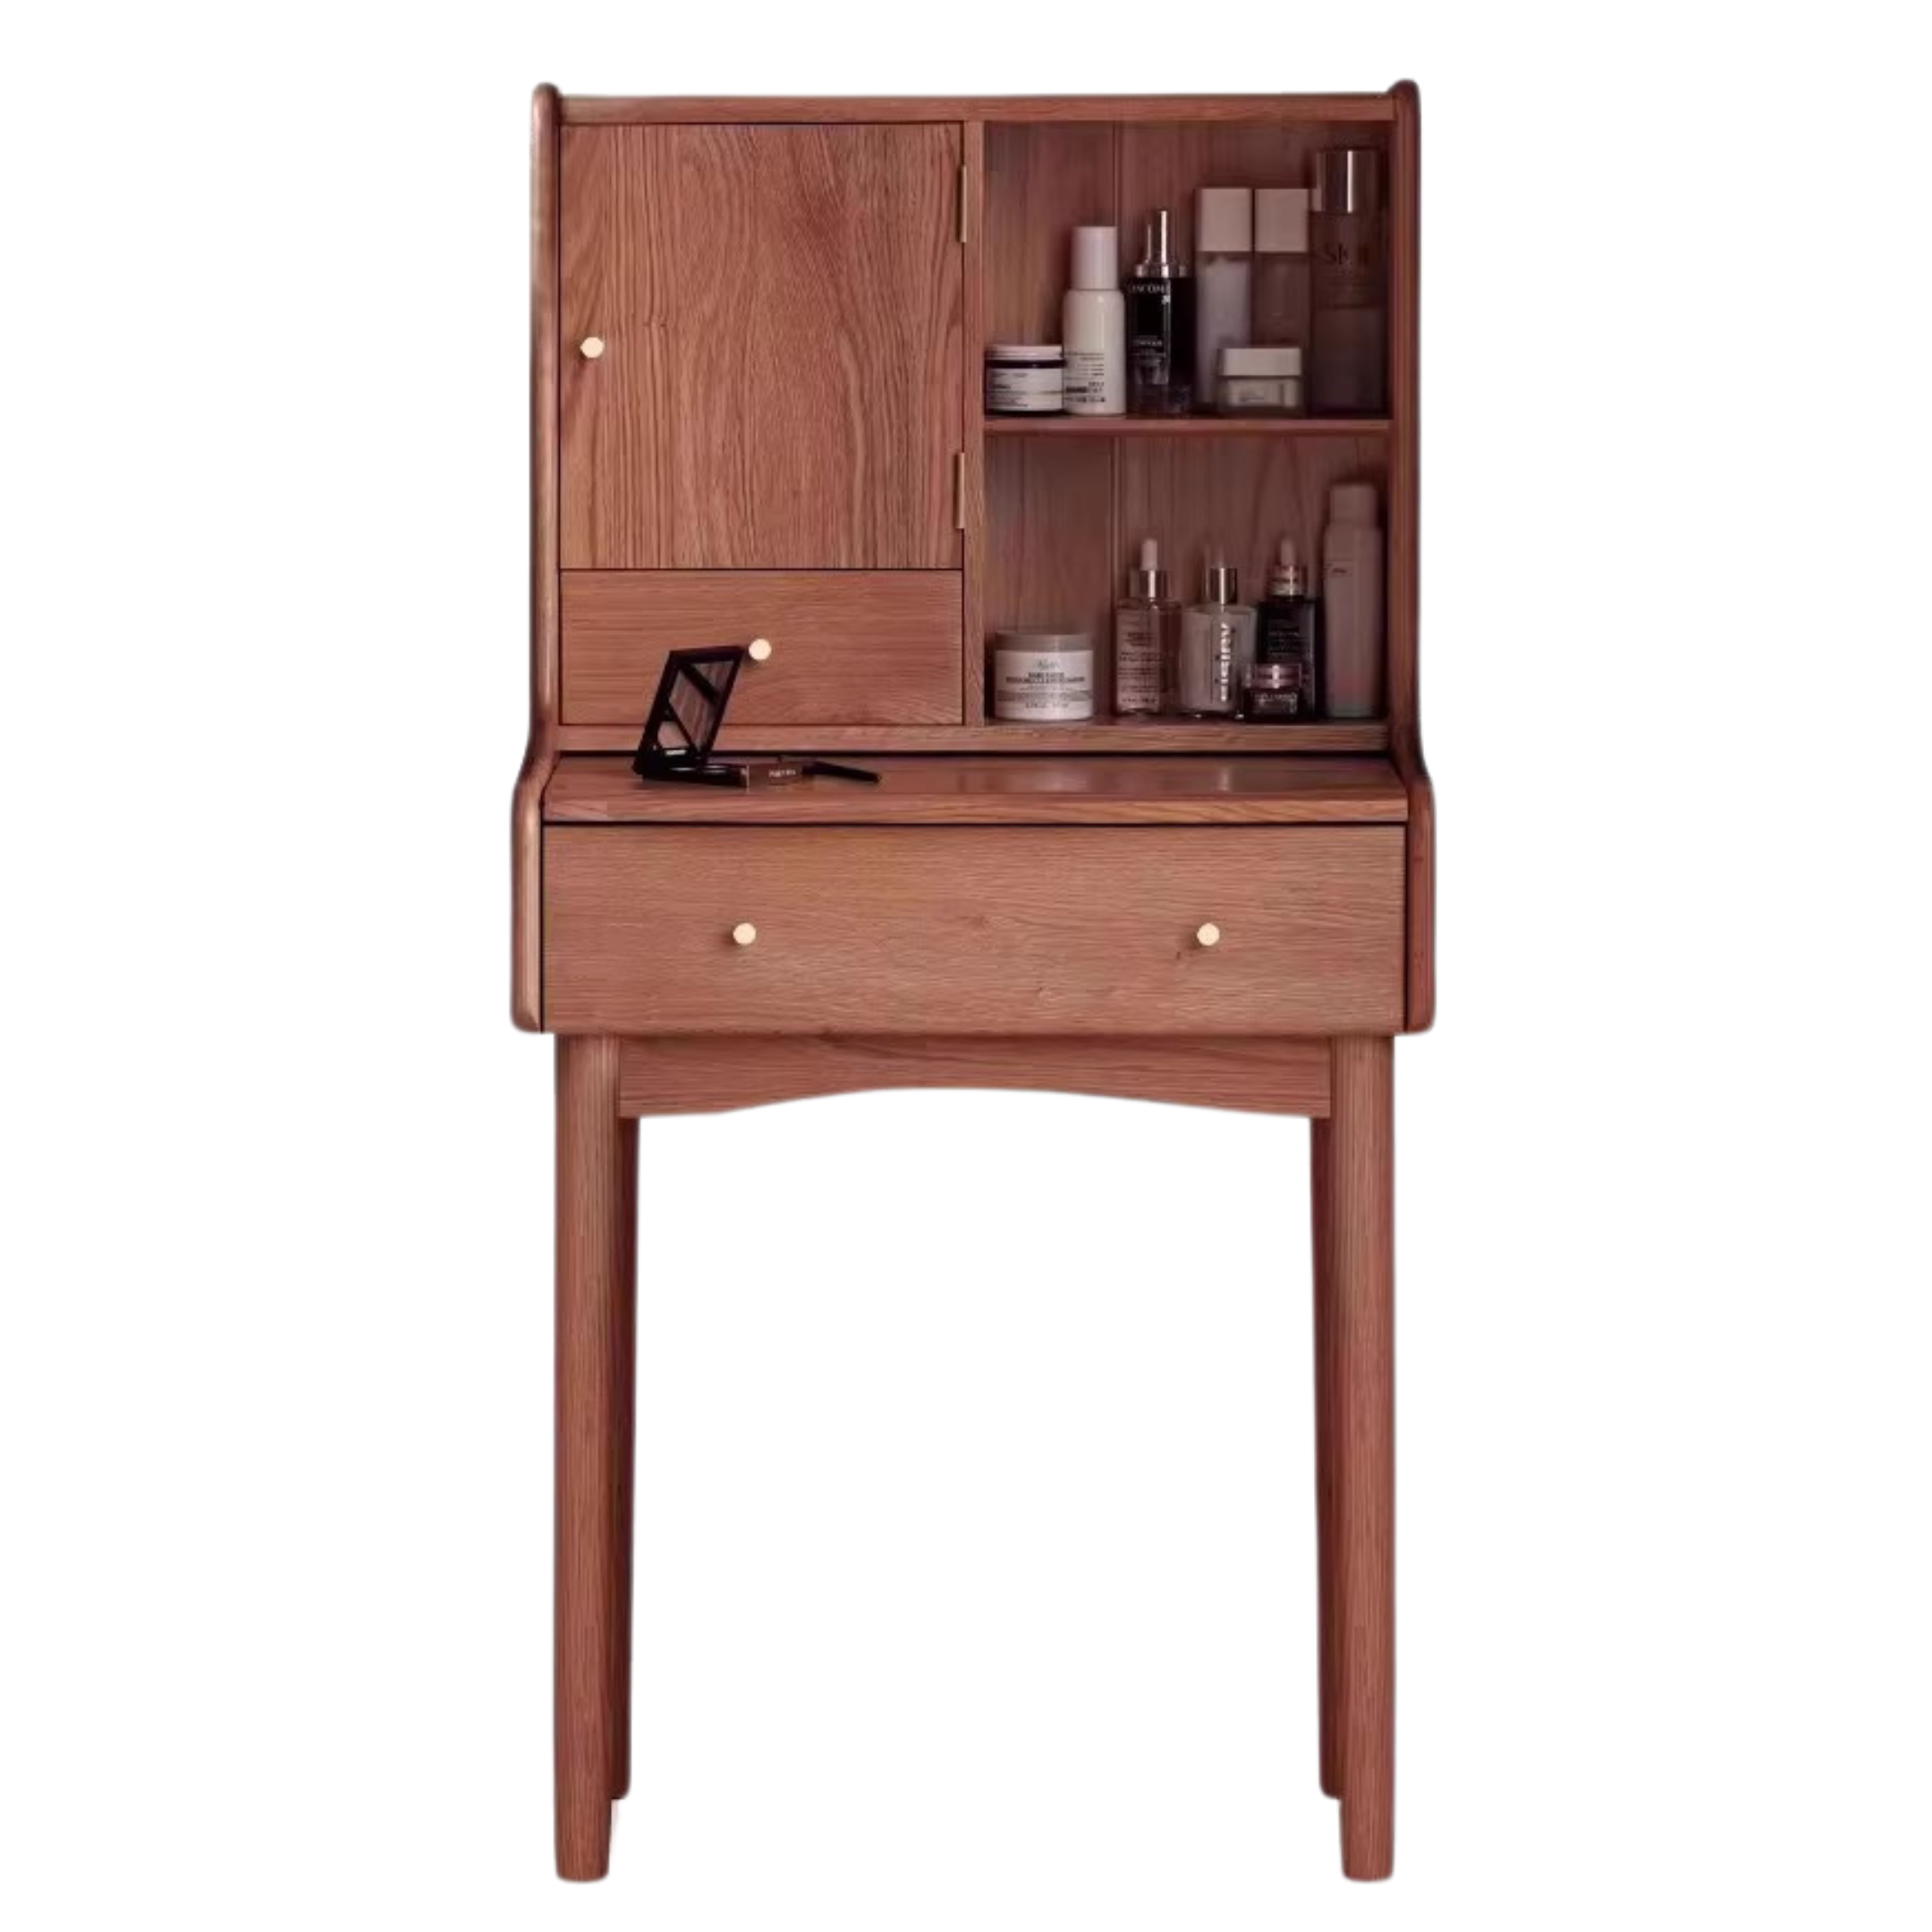 Oak solid wood Dressing table, makeup table